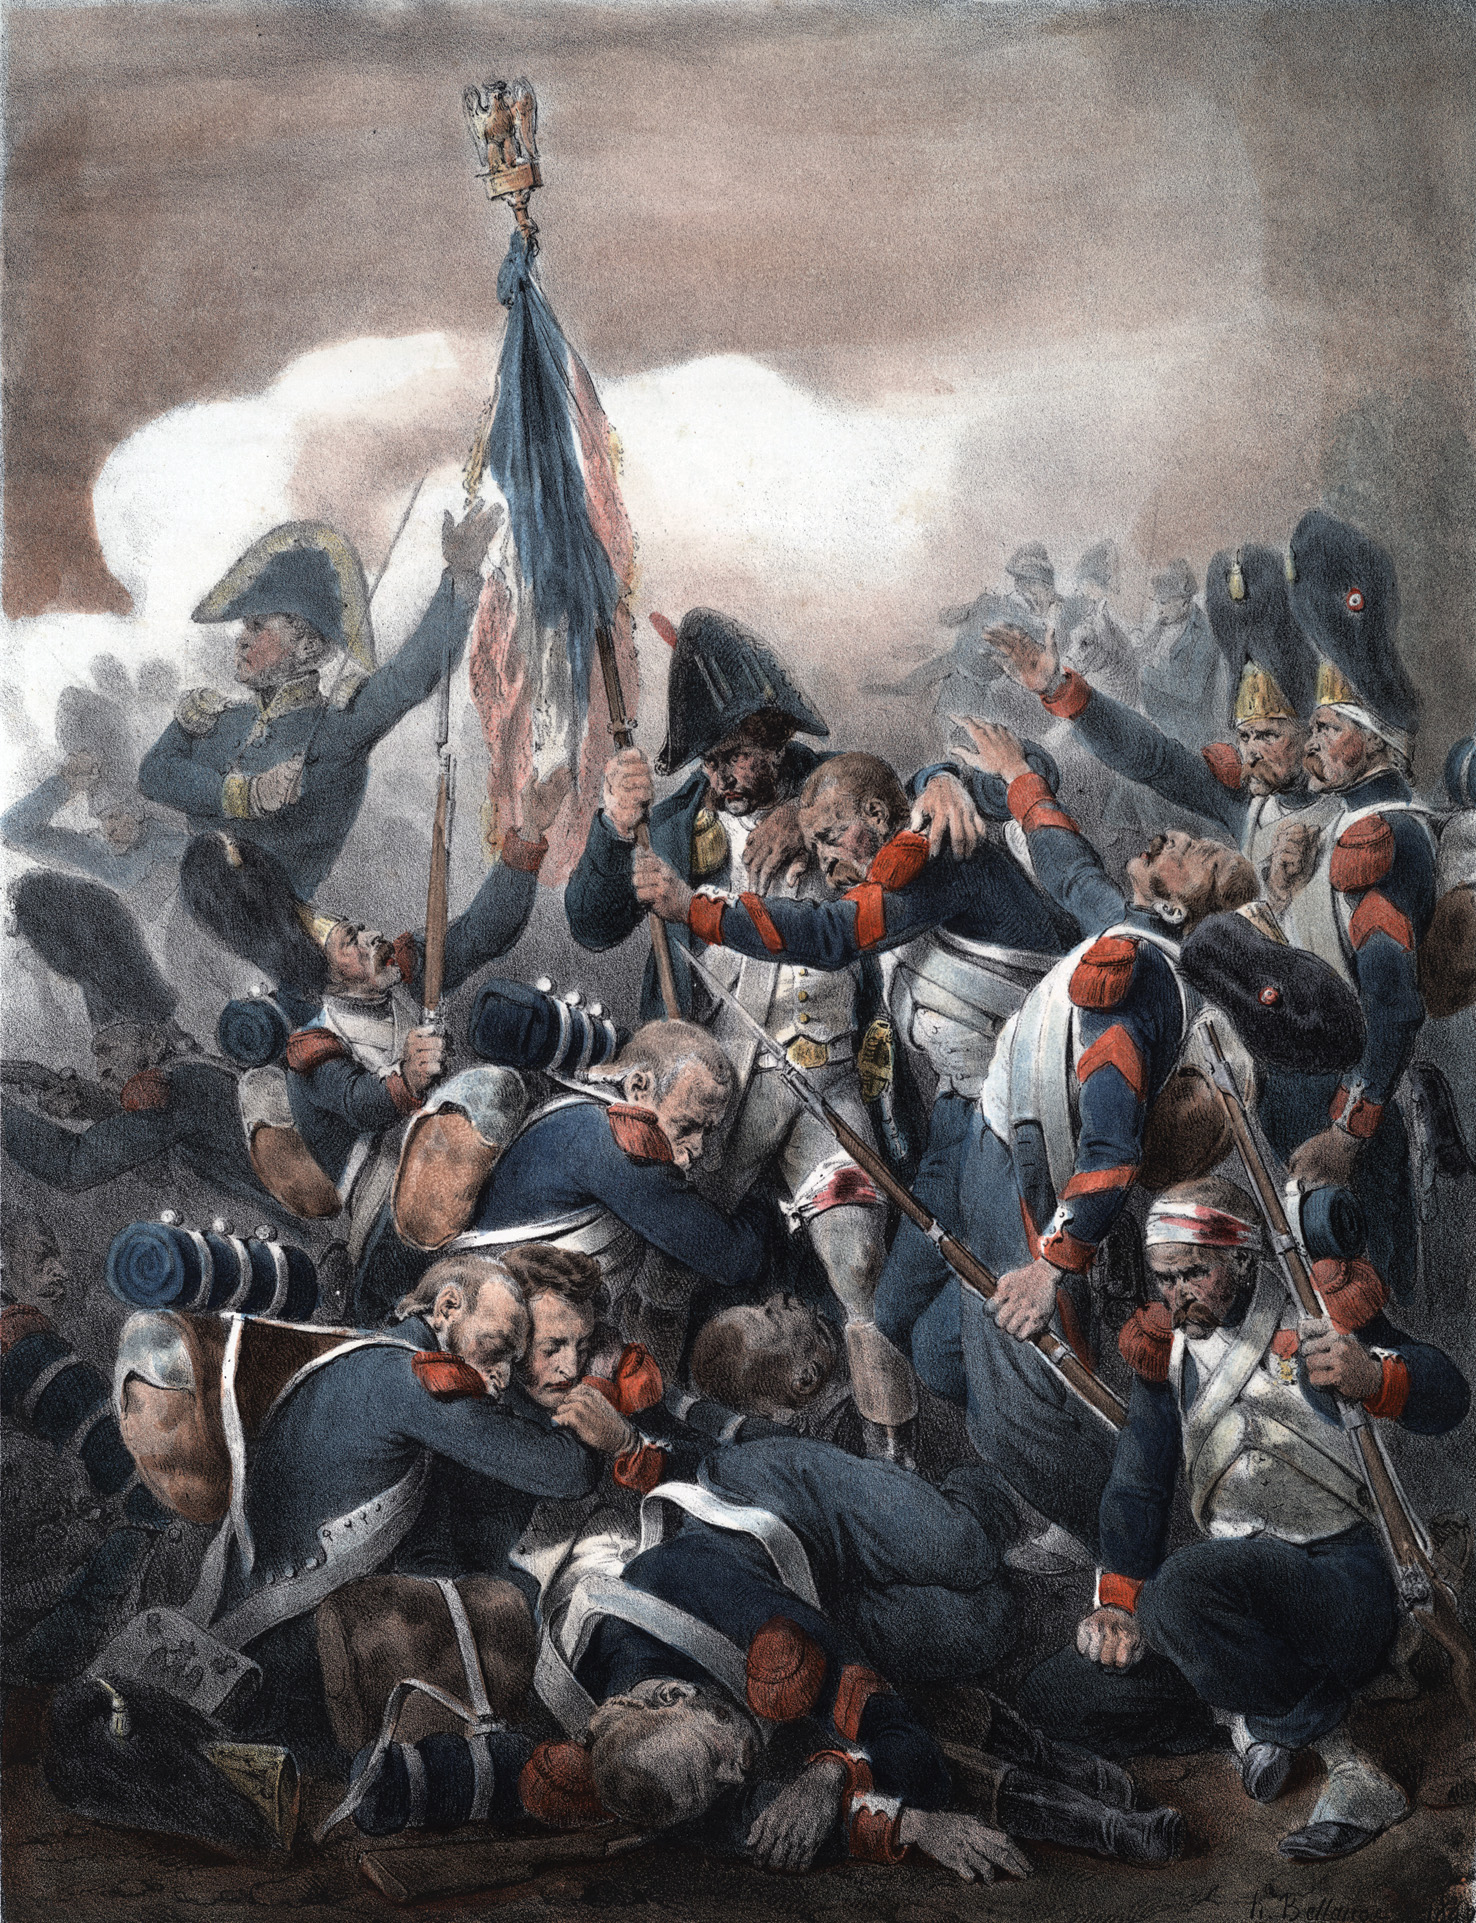 Napoleon’s Imperial Guard was shattered in its climactic assault on the Anglo-Dutch line. Faithful to the end, two battalions of the Old Guard covered the retreat of the rest of the French army.